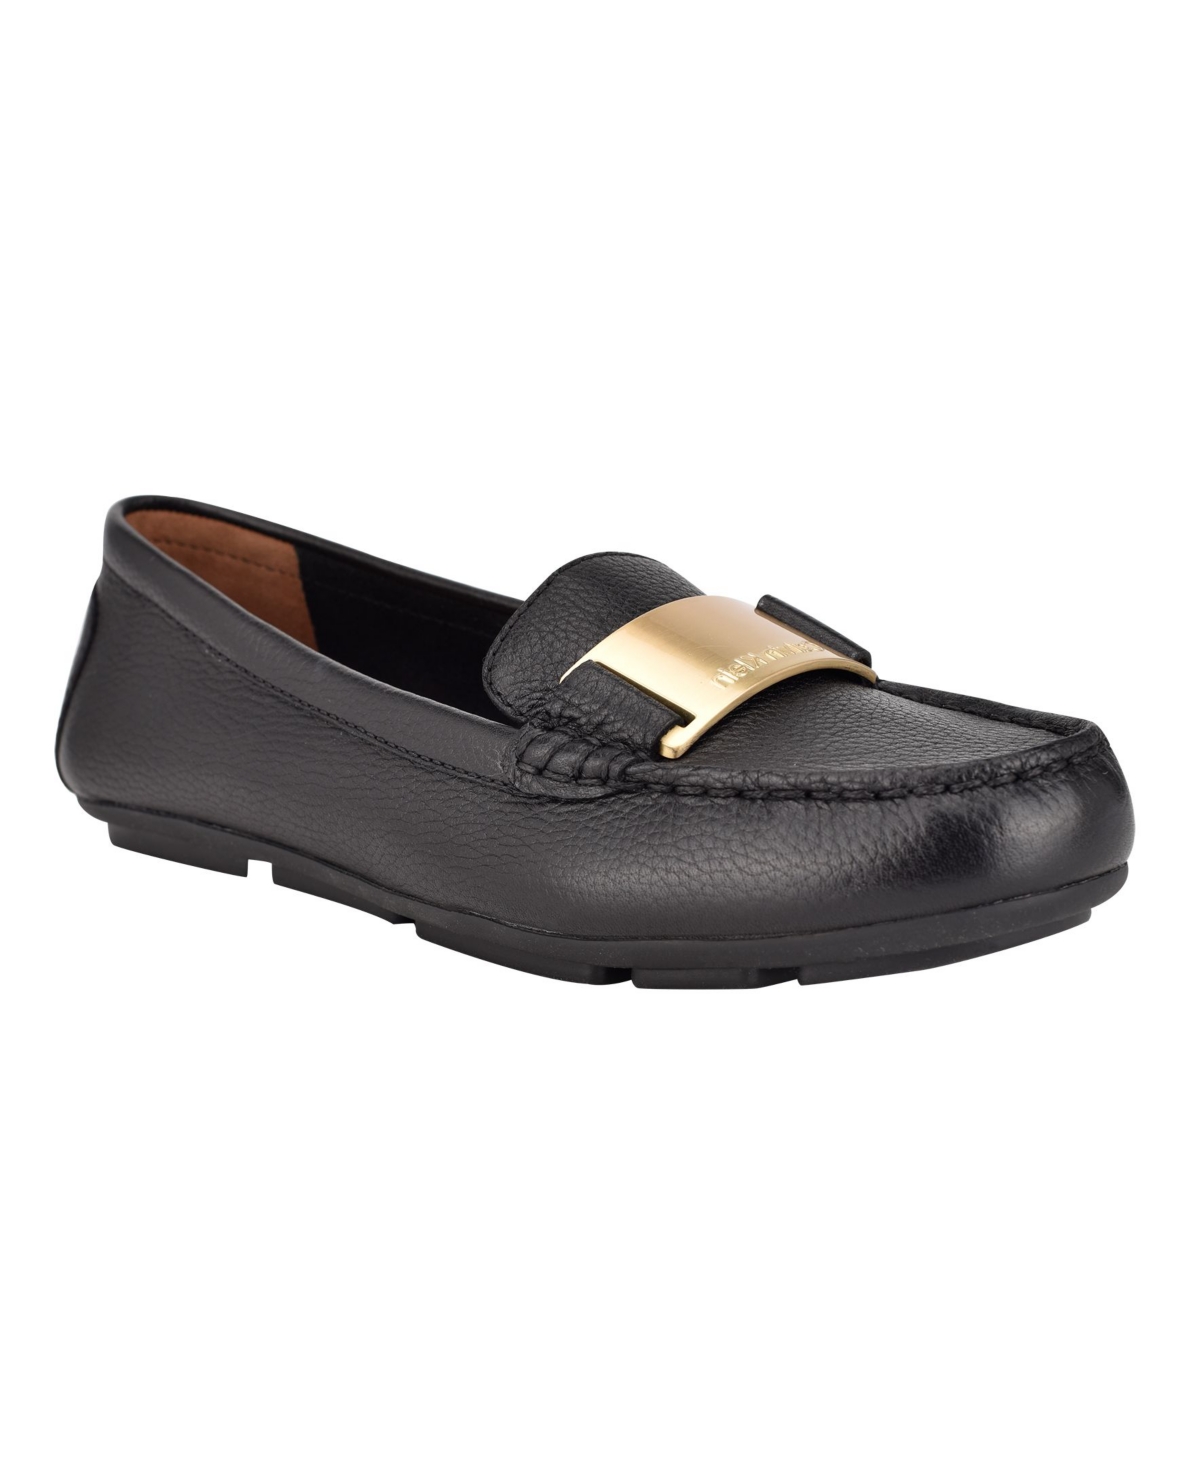 UPC 195182489054 product image for Calvin Klein Women's Lisette Casual Loafers Women's Shoes | upcitemdb.com